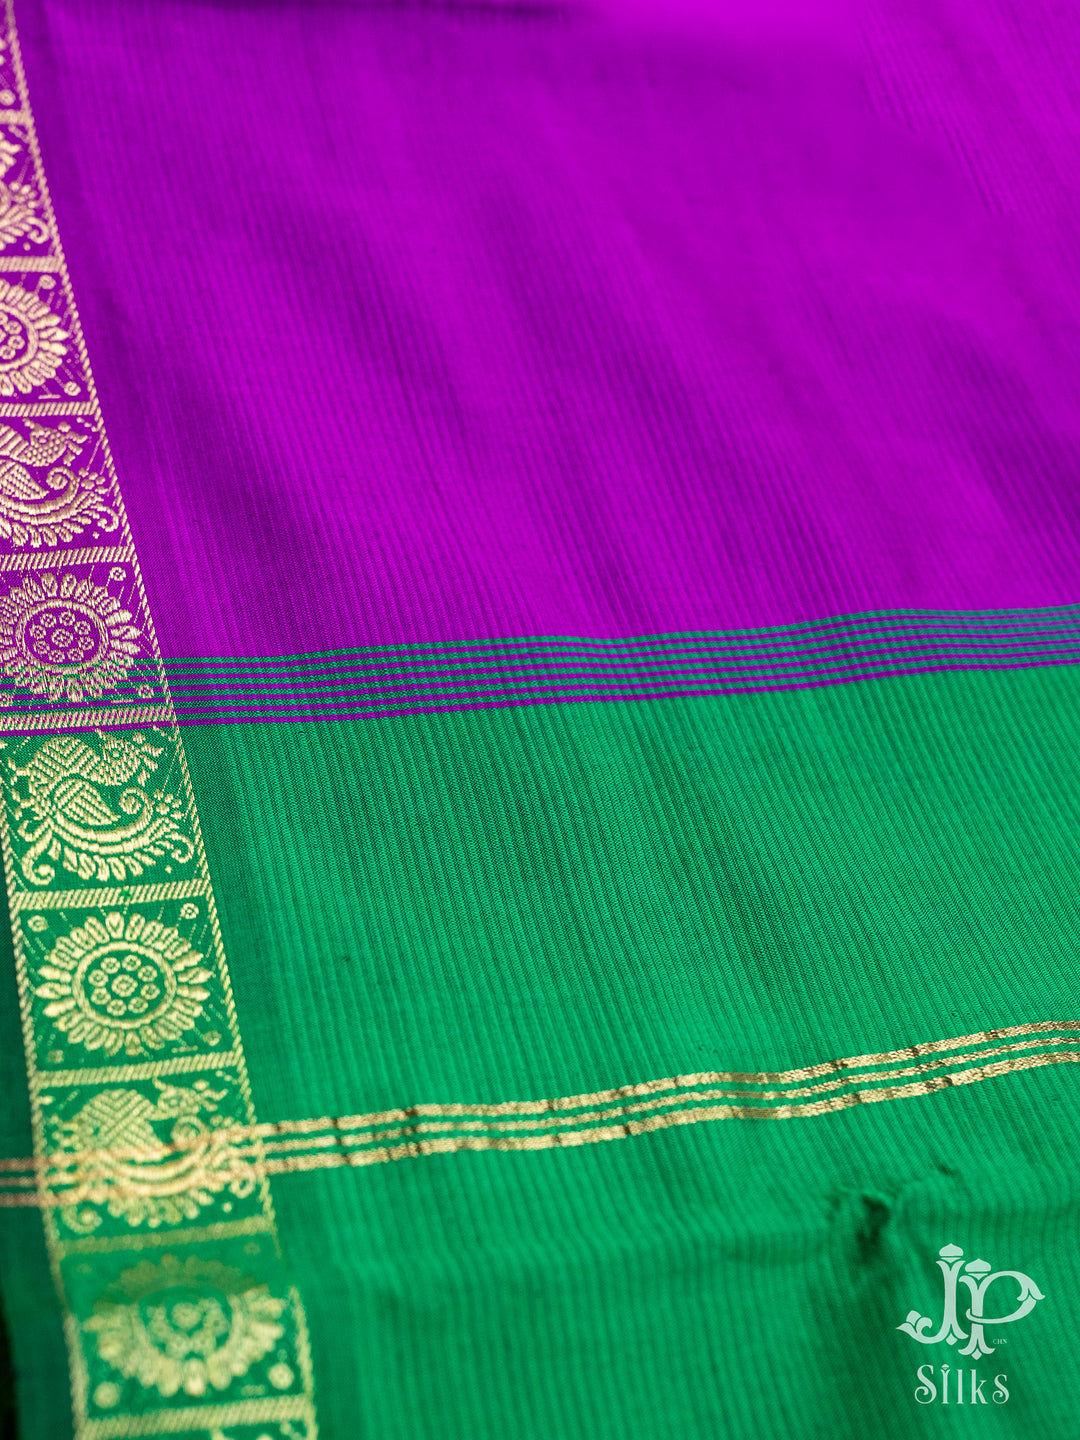 Leaf Green and Purple Poly Cotton Saree - D1124 - View 3